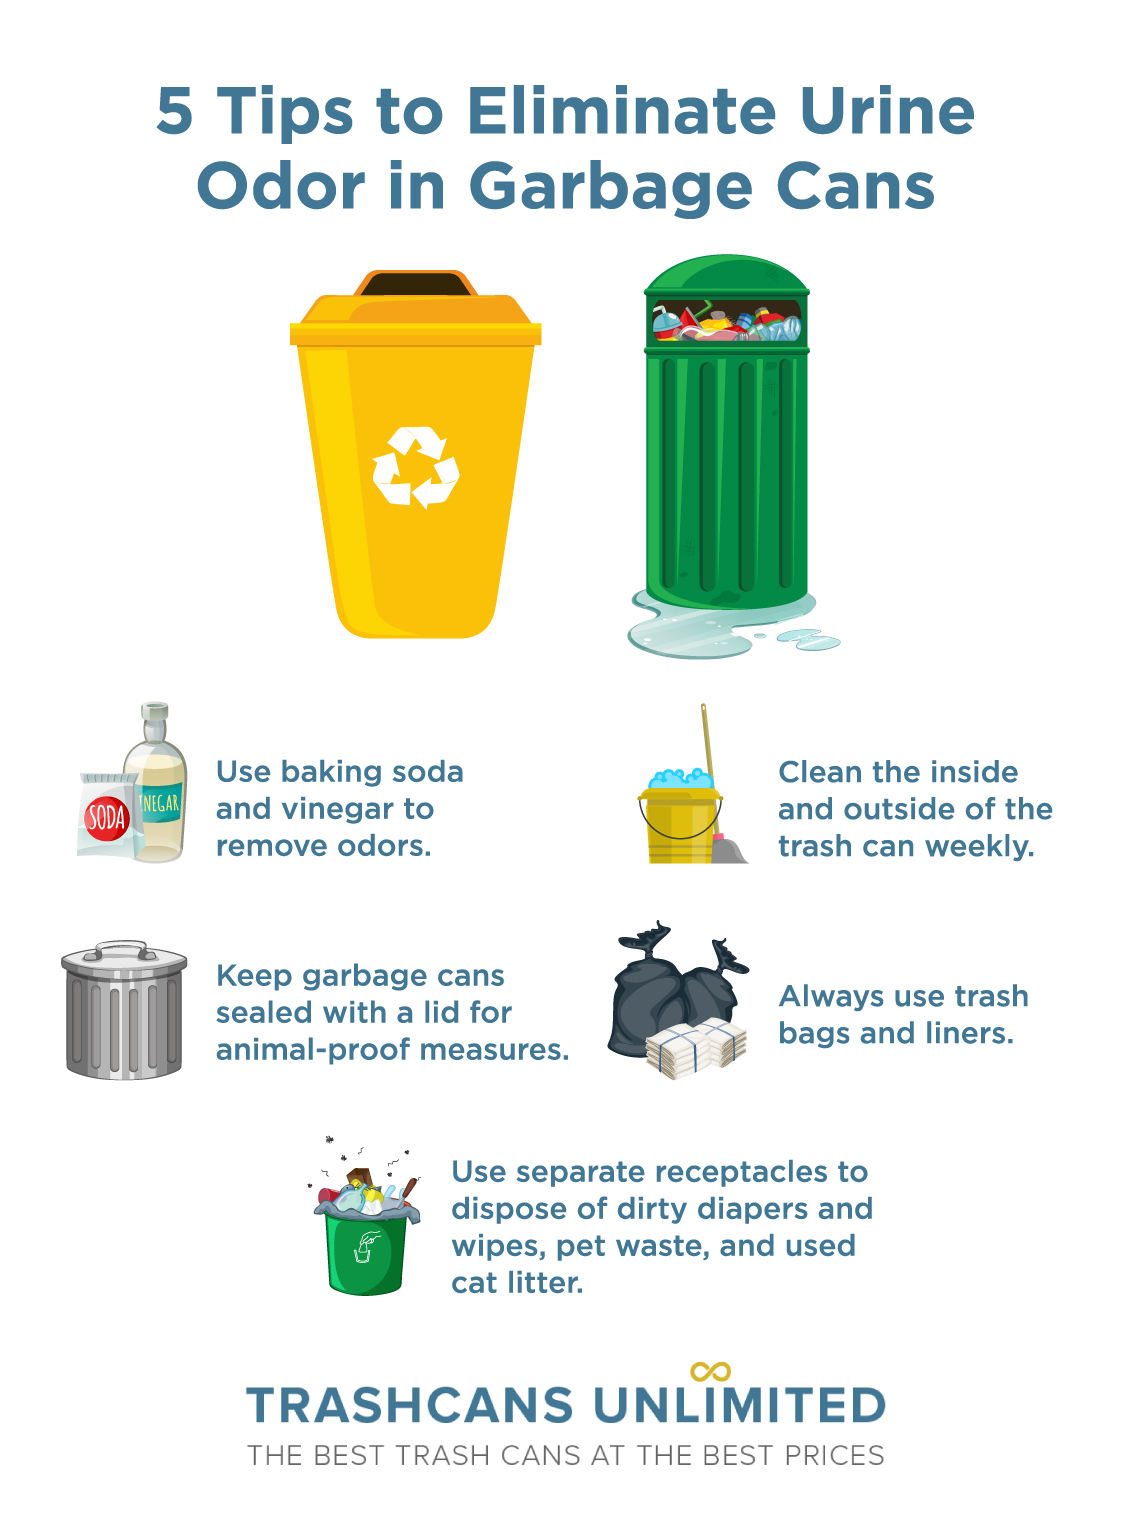 5 tips to eliminate urine odor in garbage cans